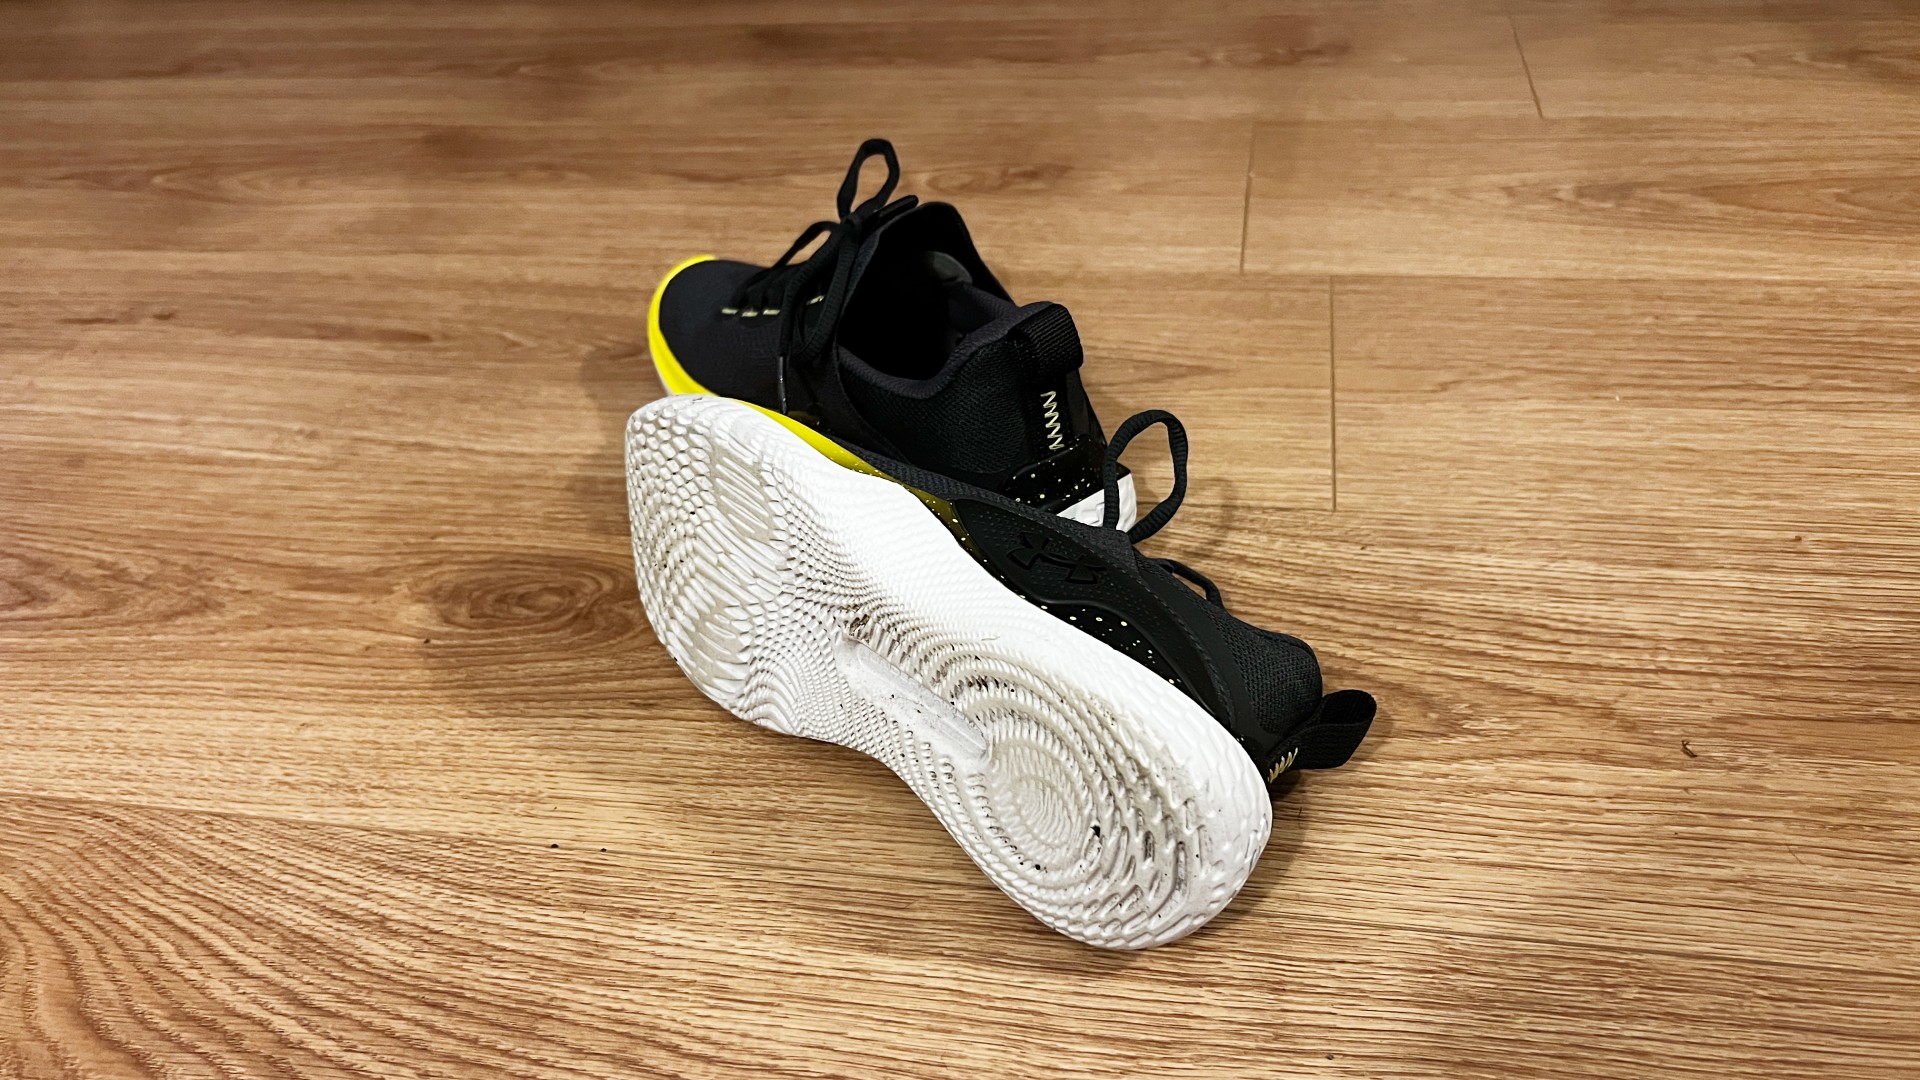 UA Flow Dynamic training shoe with outsole on show against wooden floor